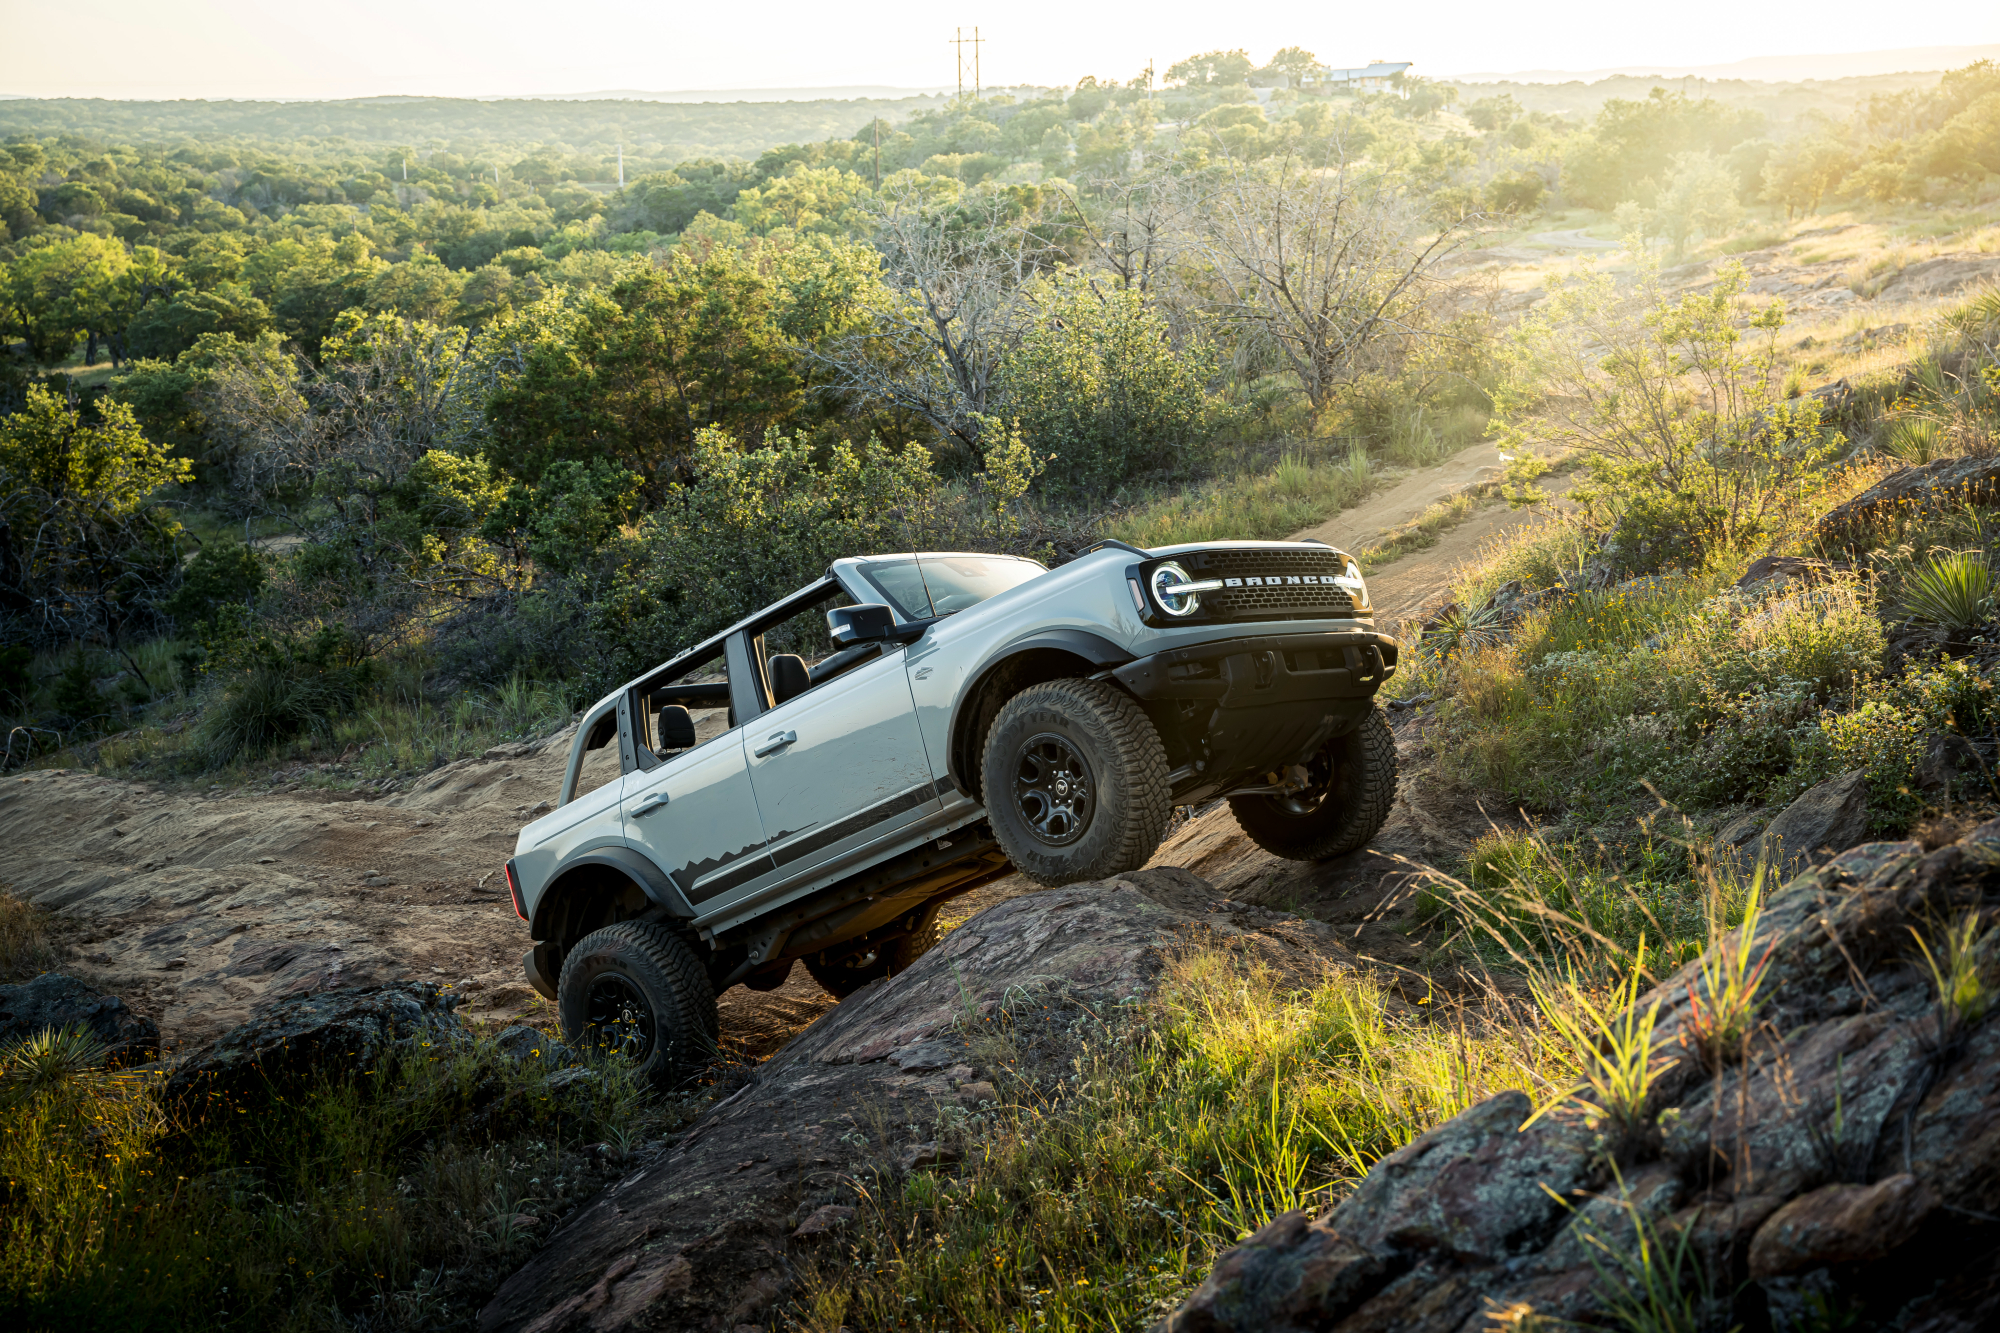 2021 Ford Bronco white body with roof open crawling over large rocks in the outback.